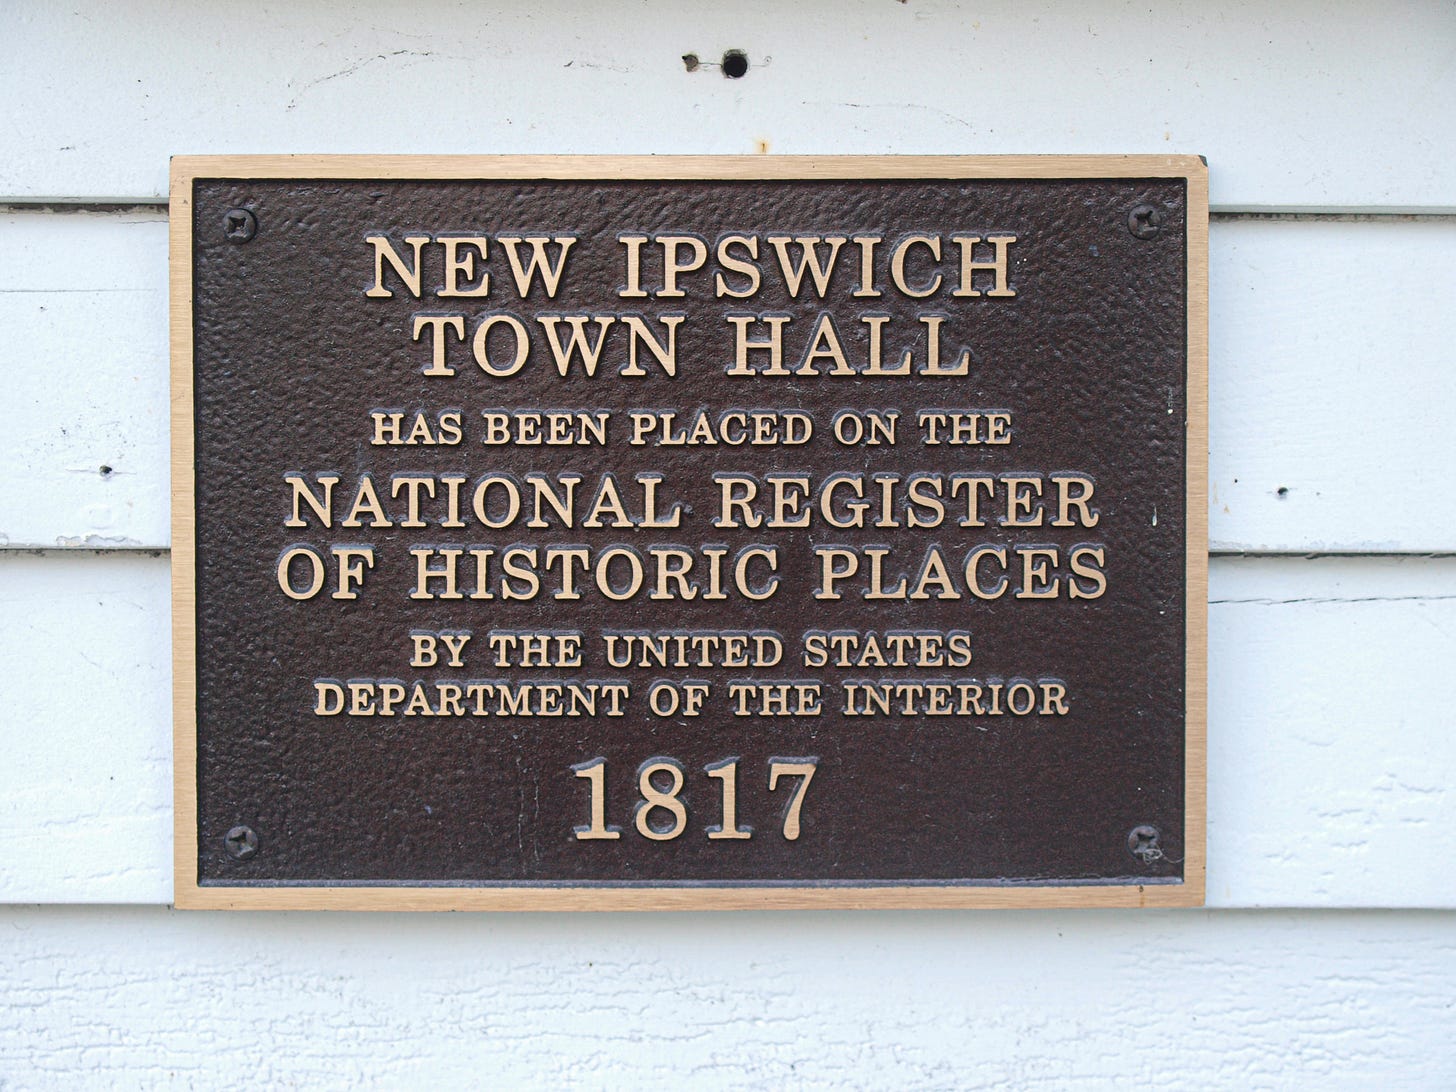 Bronze marker for NI town hall